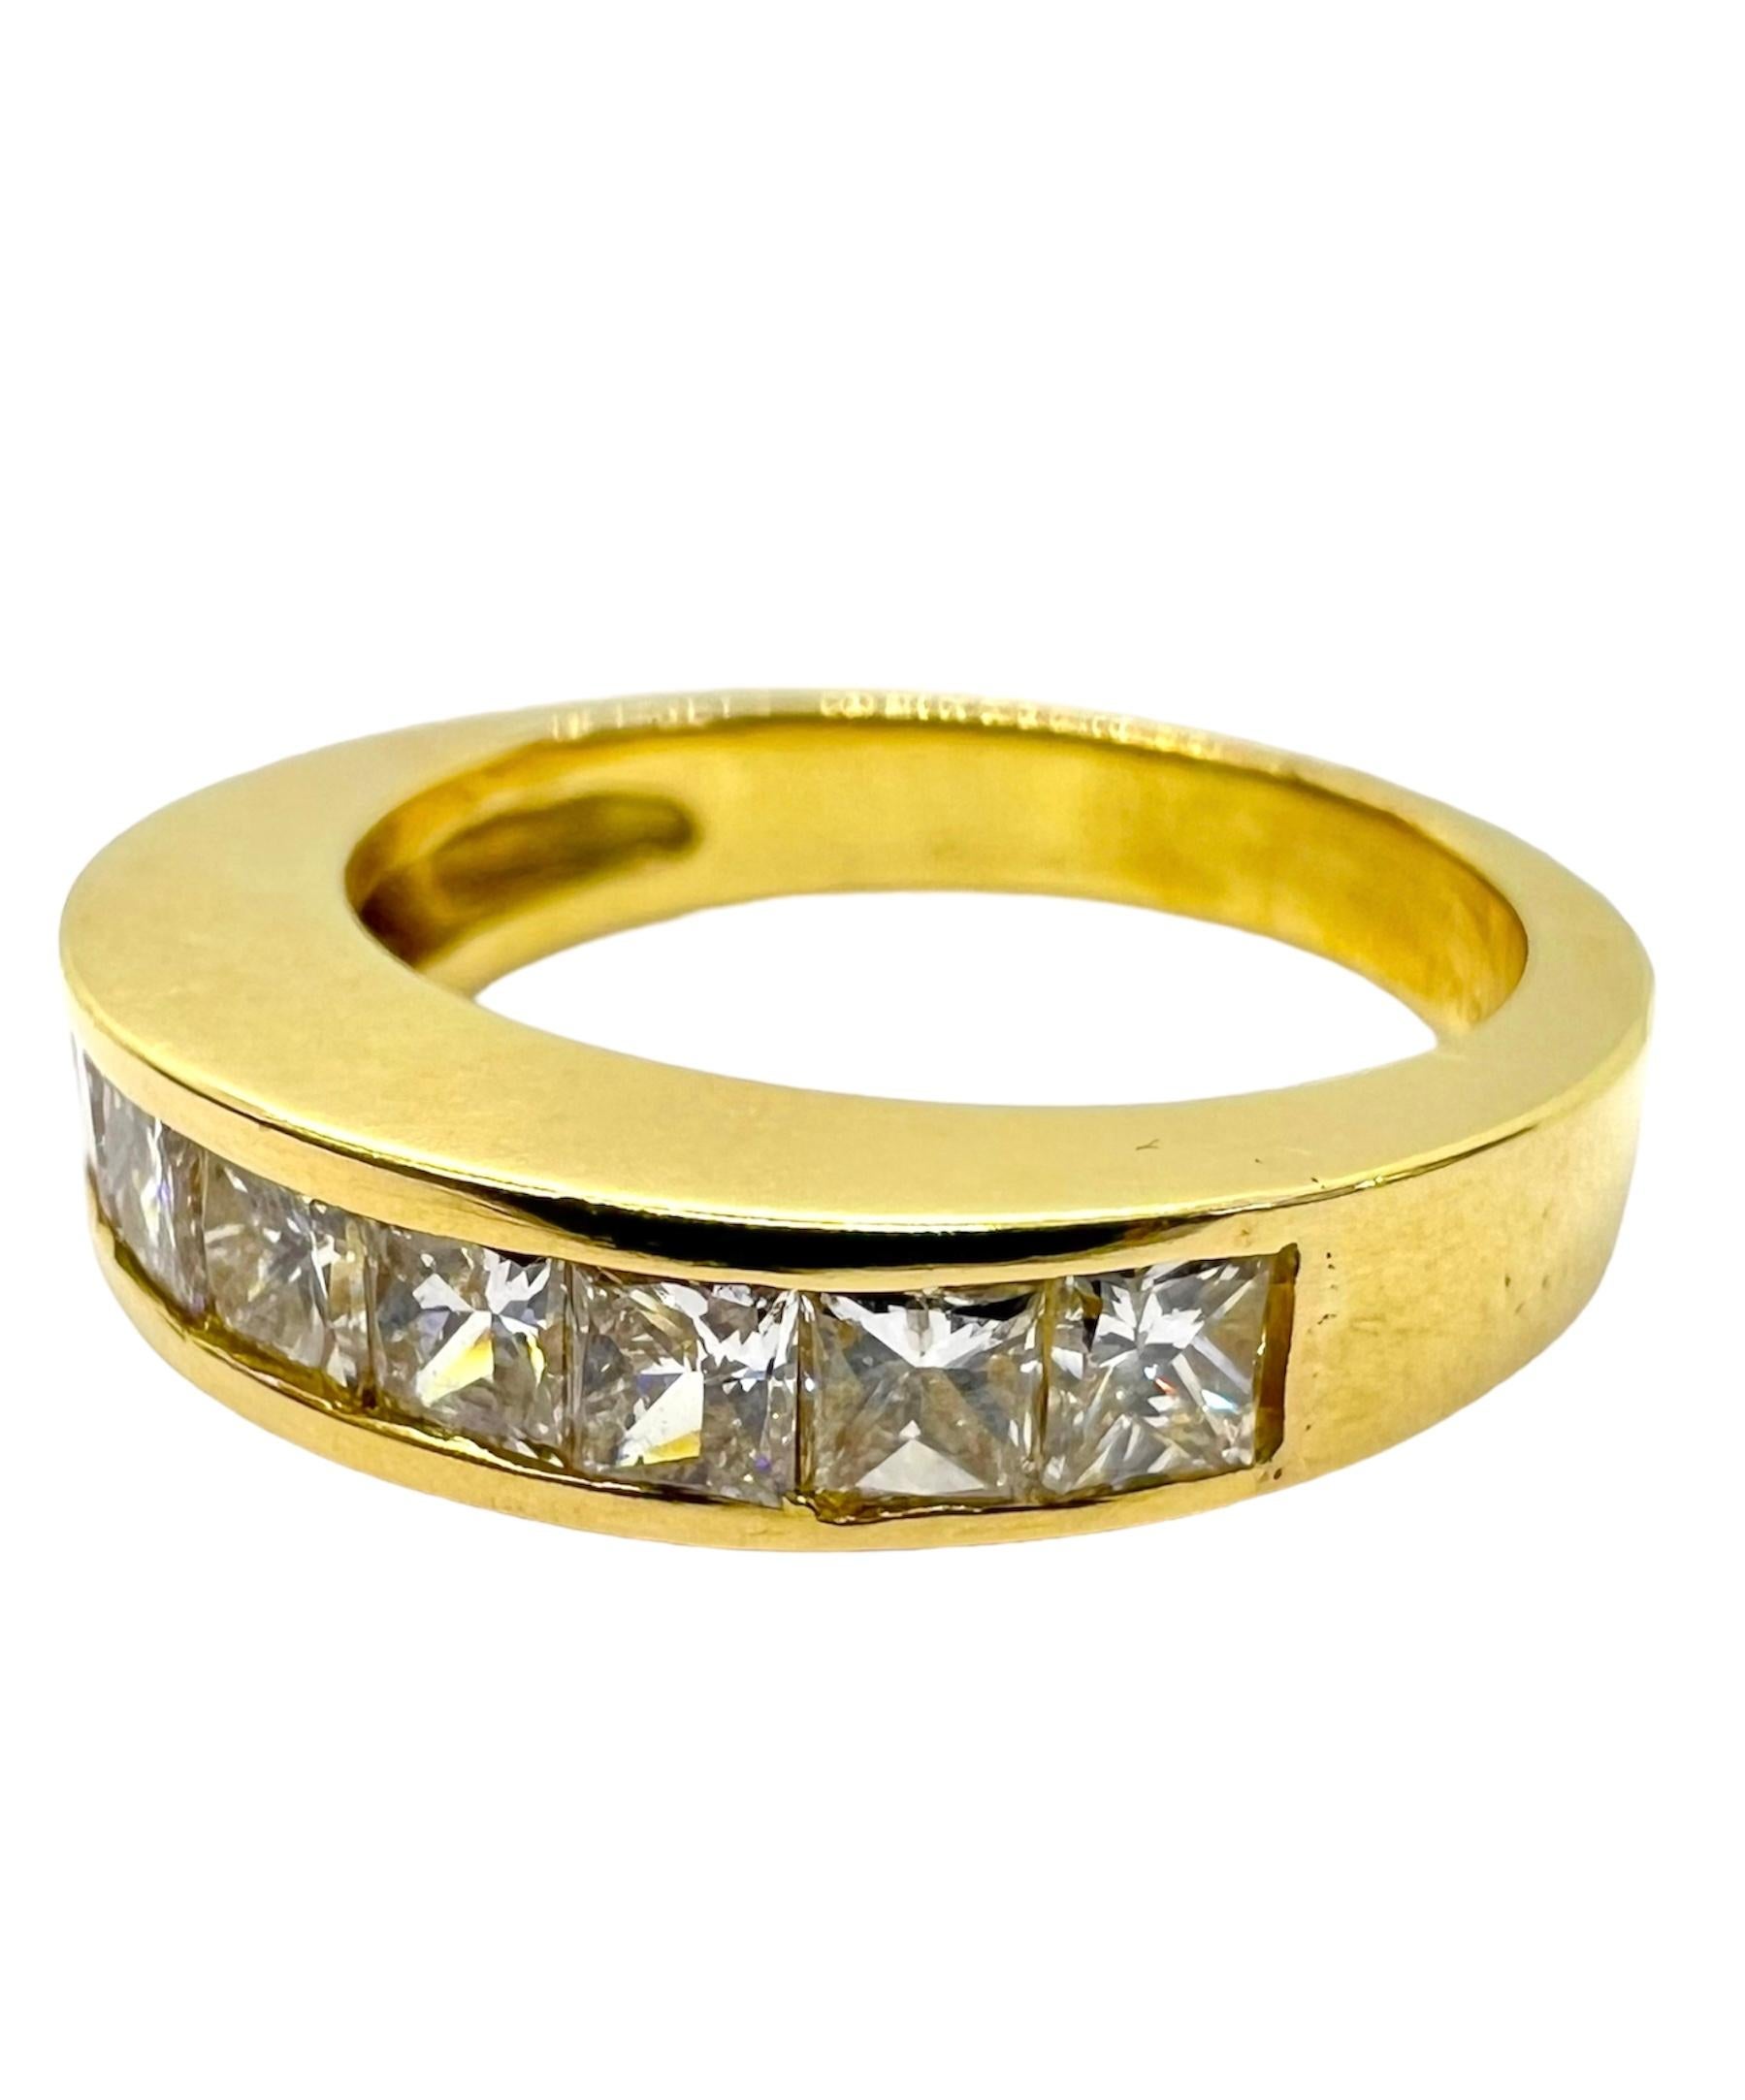 18K yellow gold band ring with square cut diamonds.

Sophia D by Joseph Dardashti LTD has been known worldwide for 35 years and are inspired by classic Art Deco design that merges with modern manufacturing techniques.